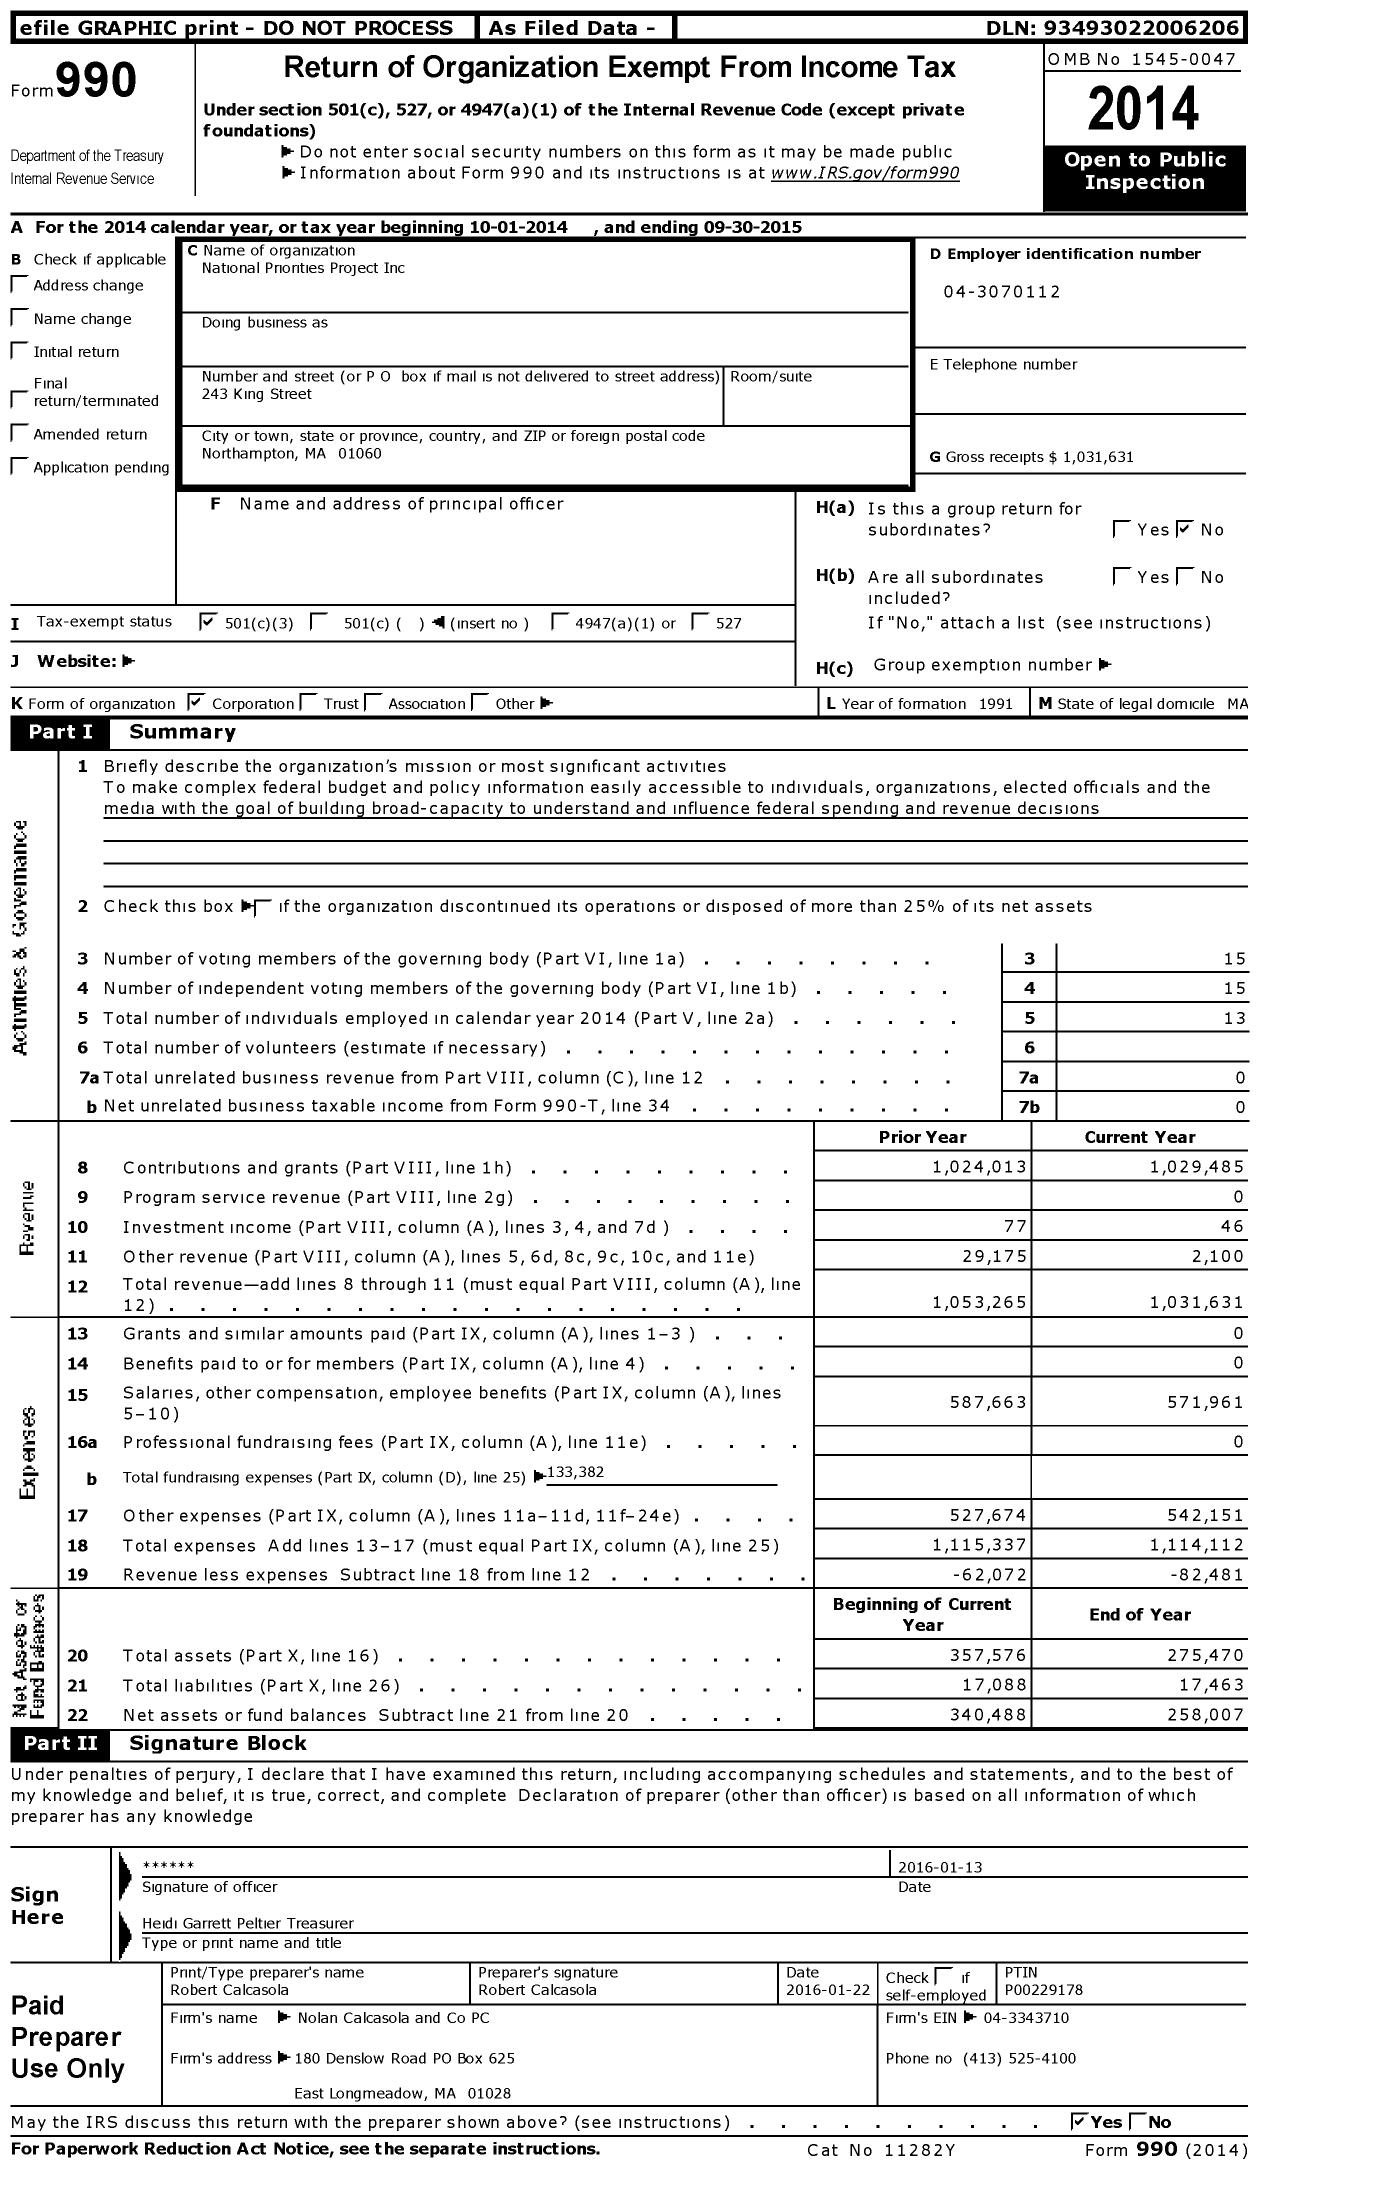 Image of first page of 2014 Form 990 for National Priorities Project